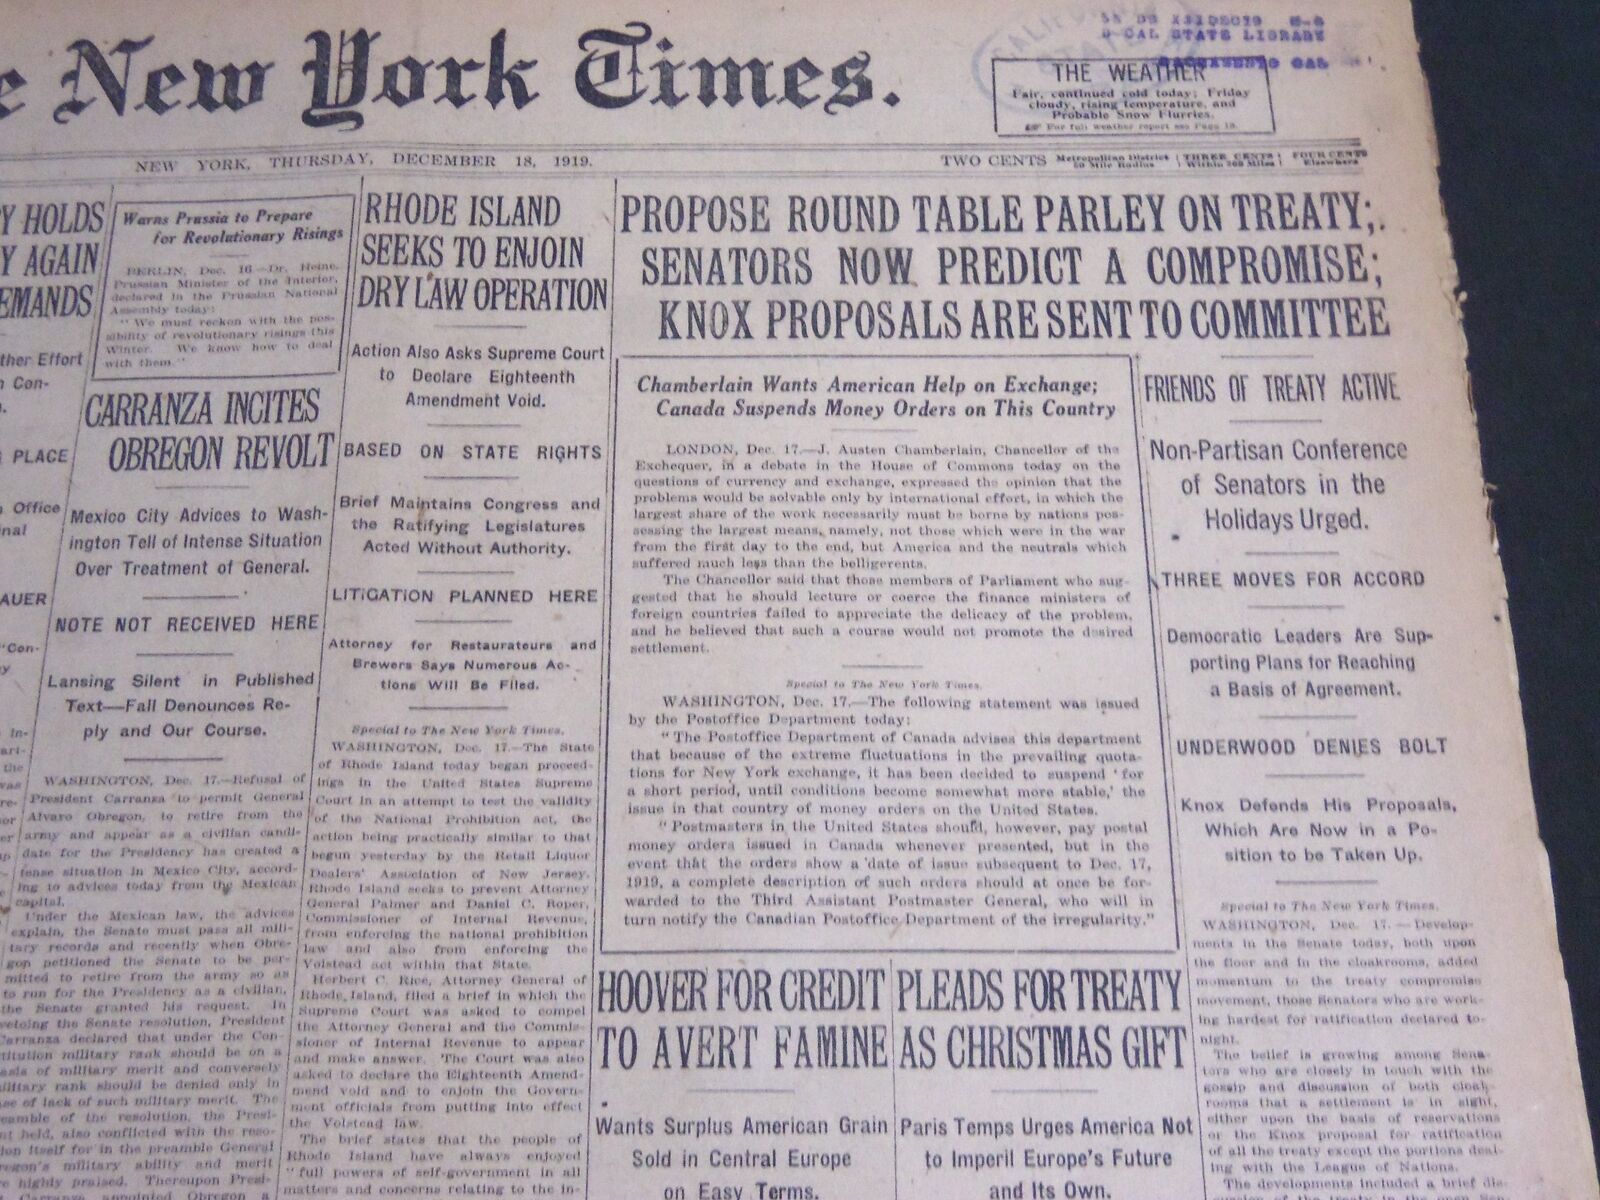 1919 DECEMBER 18 NEW YORK TIMES - PROPOSE ROUND TABLE PARLEY ON TREATY - NT 7014